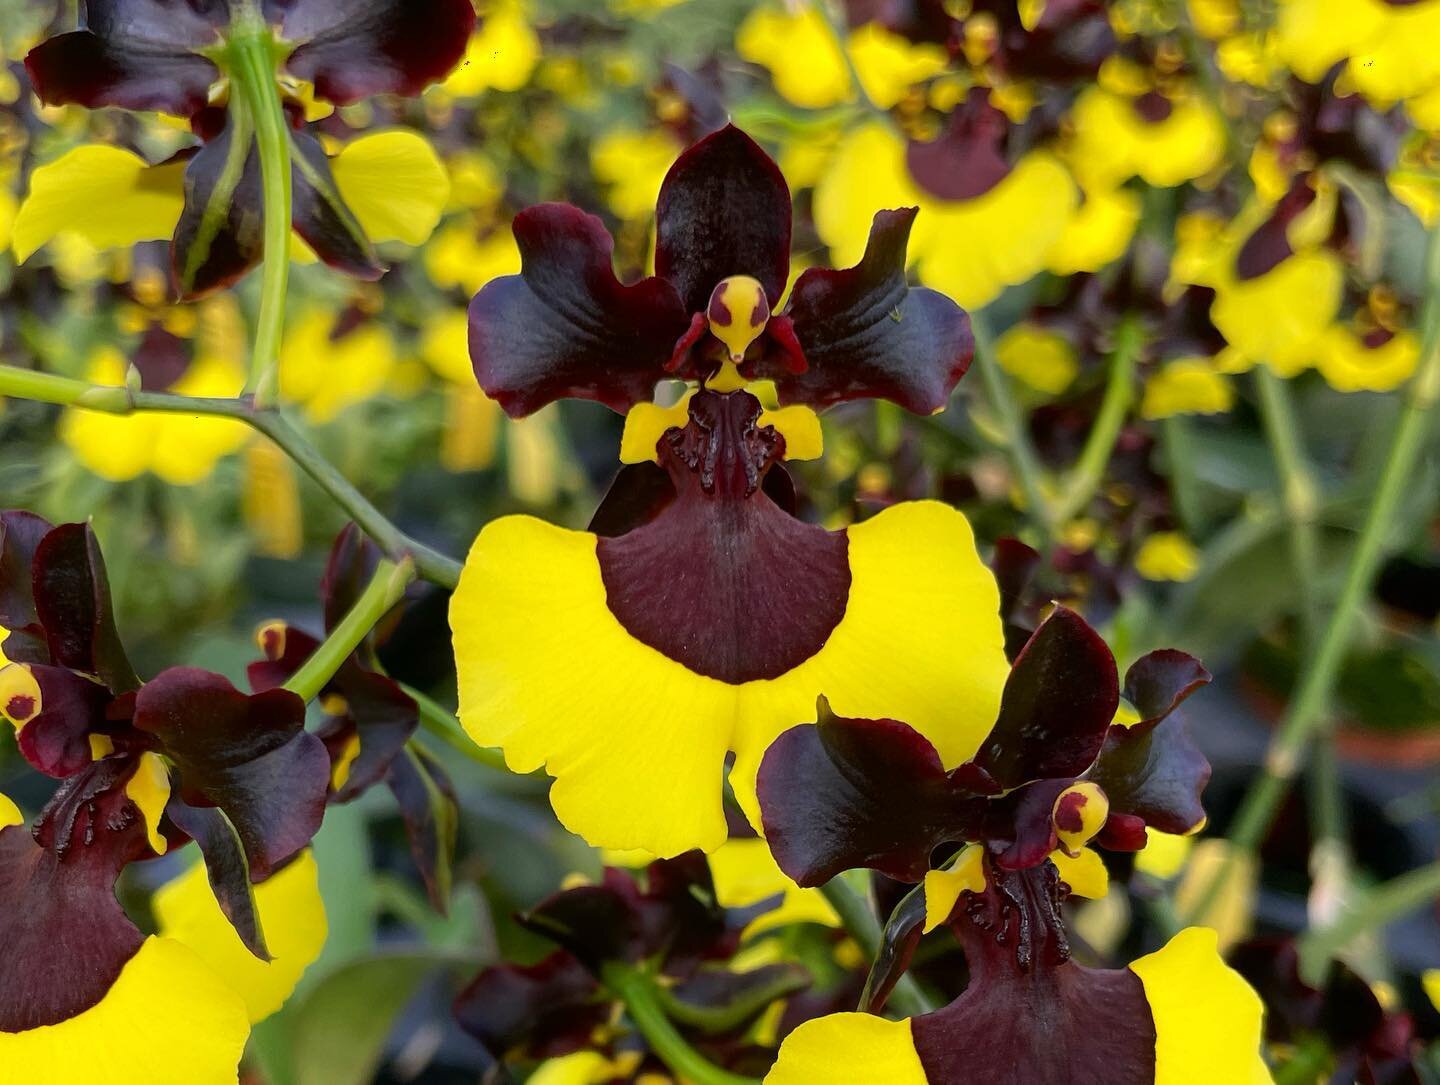 Stumbled upon a busy hive of Onc. Jiaho Queen &lsquo;Jiaho&rsquo; GM/TOGA today! 🐝🐝🐝

#oncidium #orchid #orchidphotography #ootd #orchidoftheday #wholesale #hawaiiorchids #hiloorchidfarm